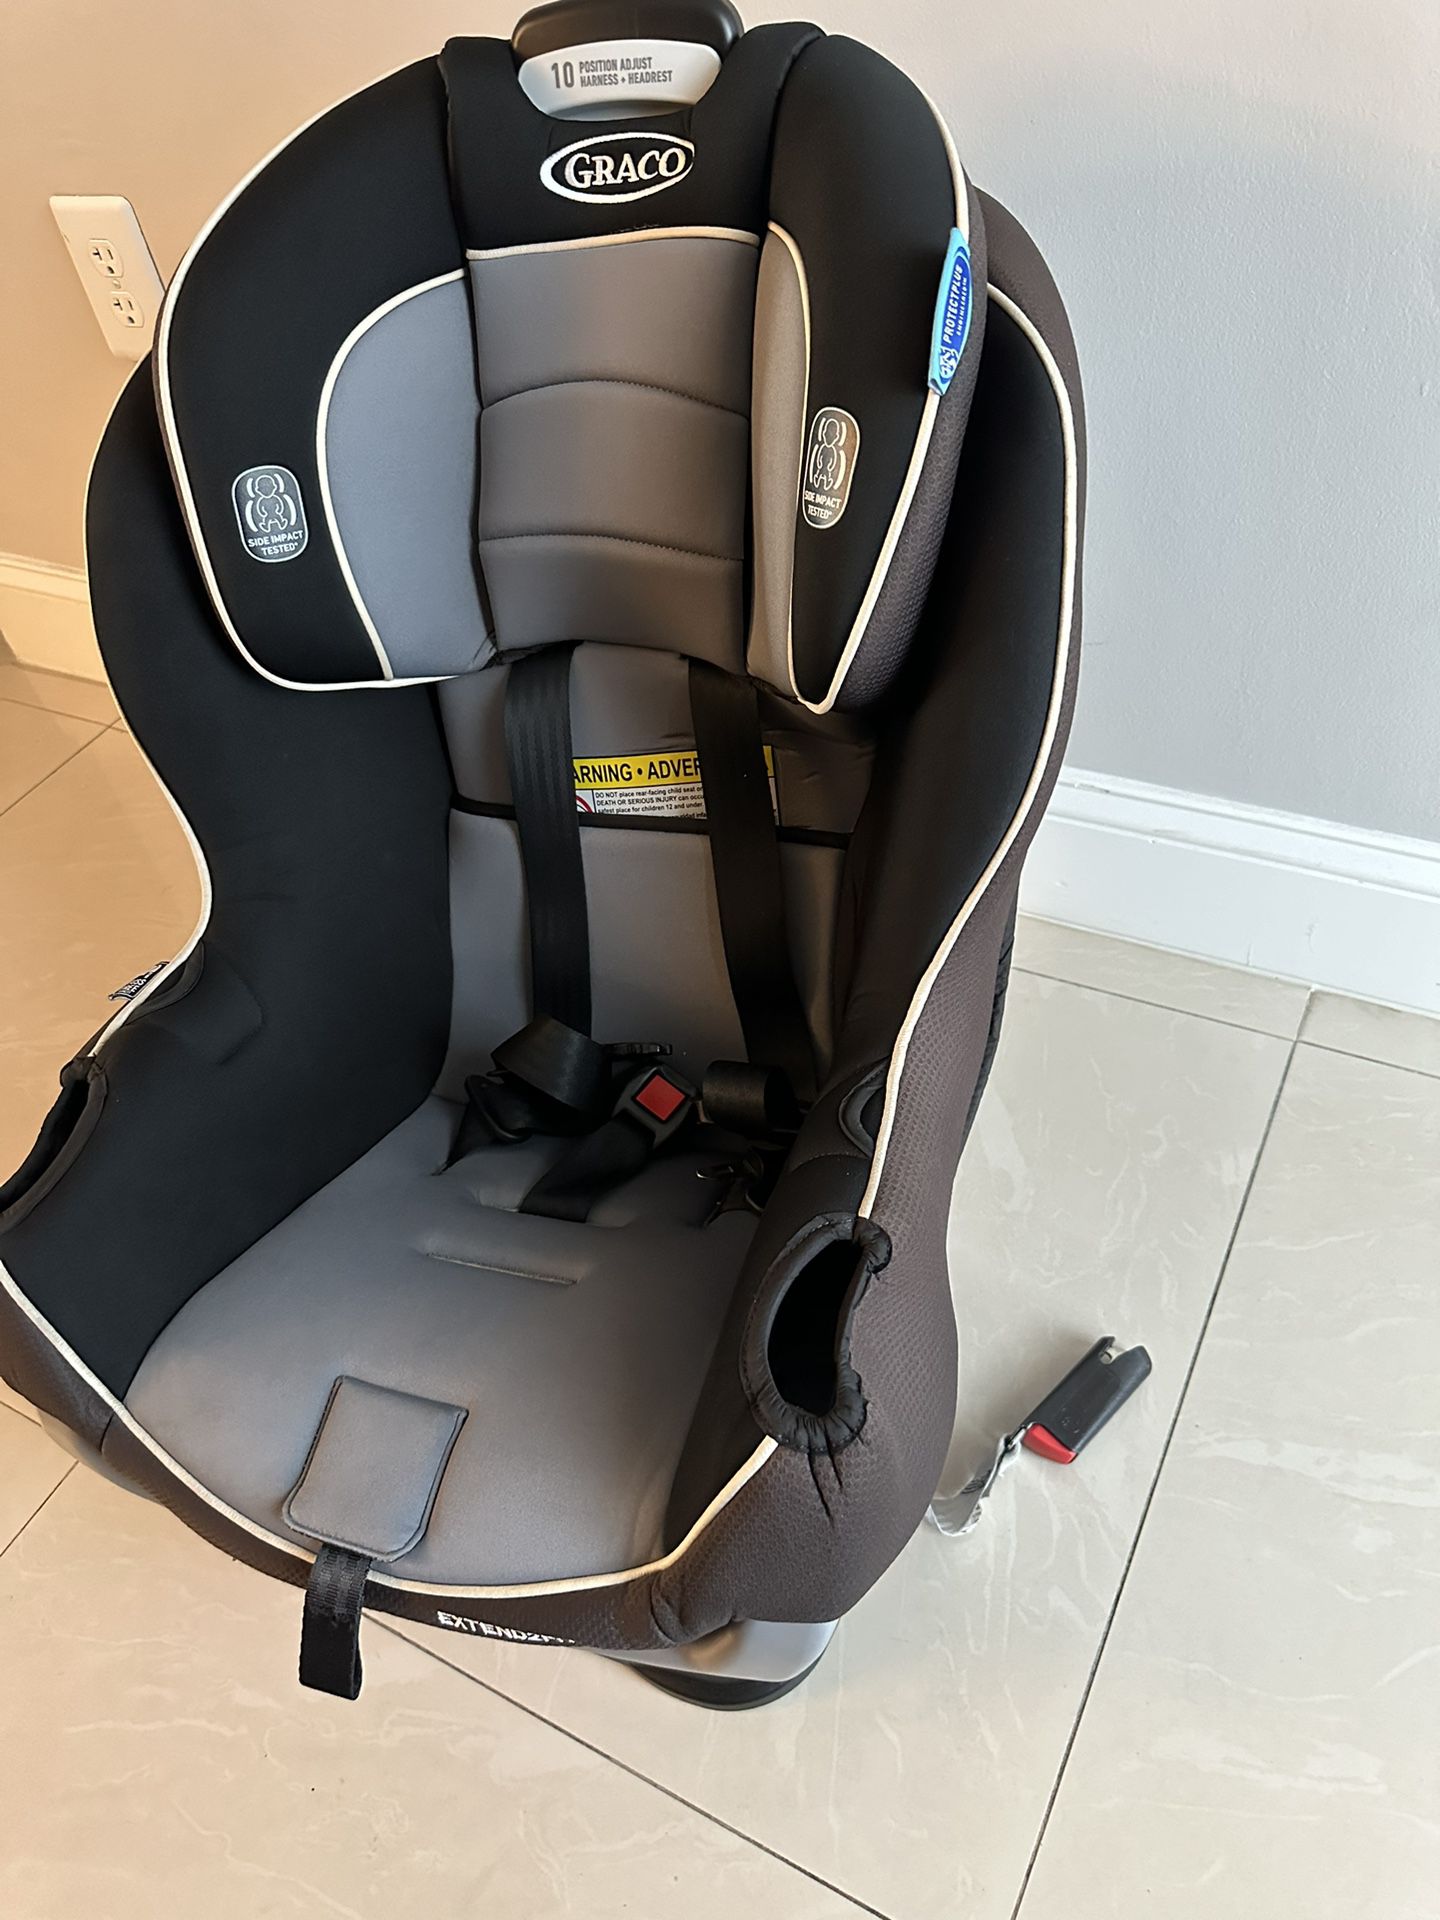 Graco Extend To Fit Car Seat 